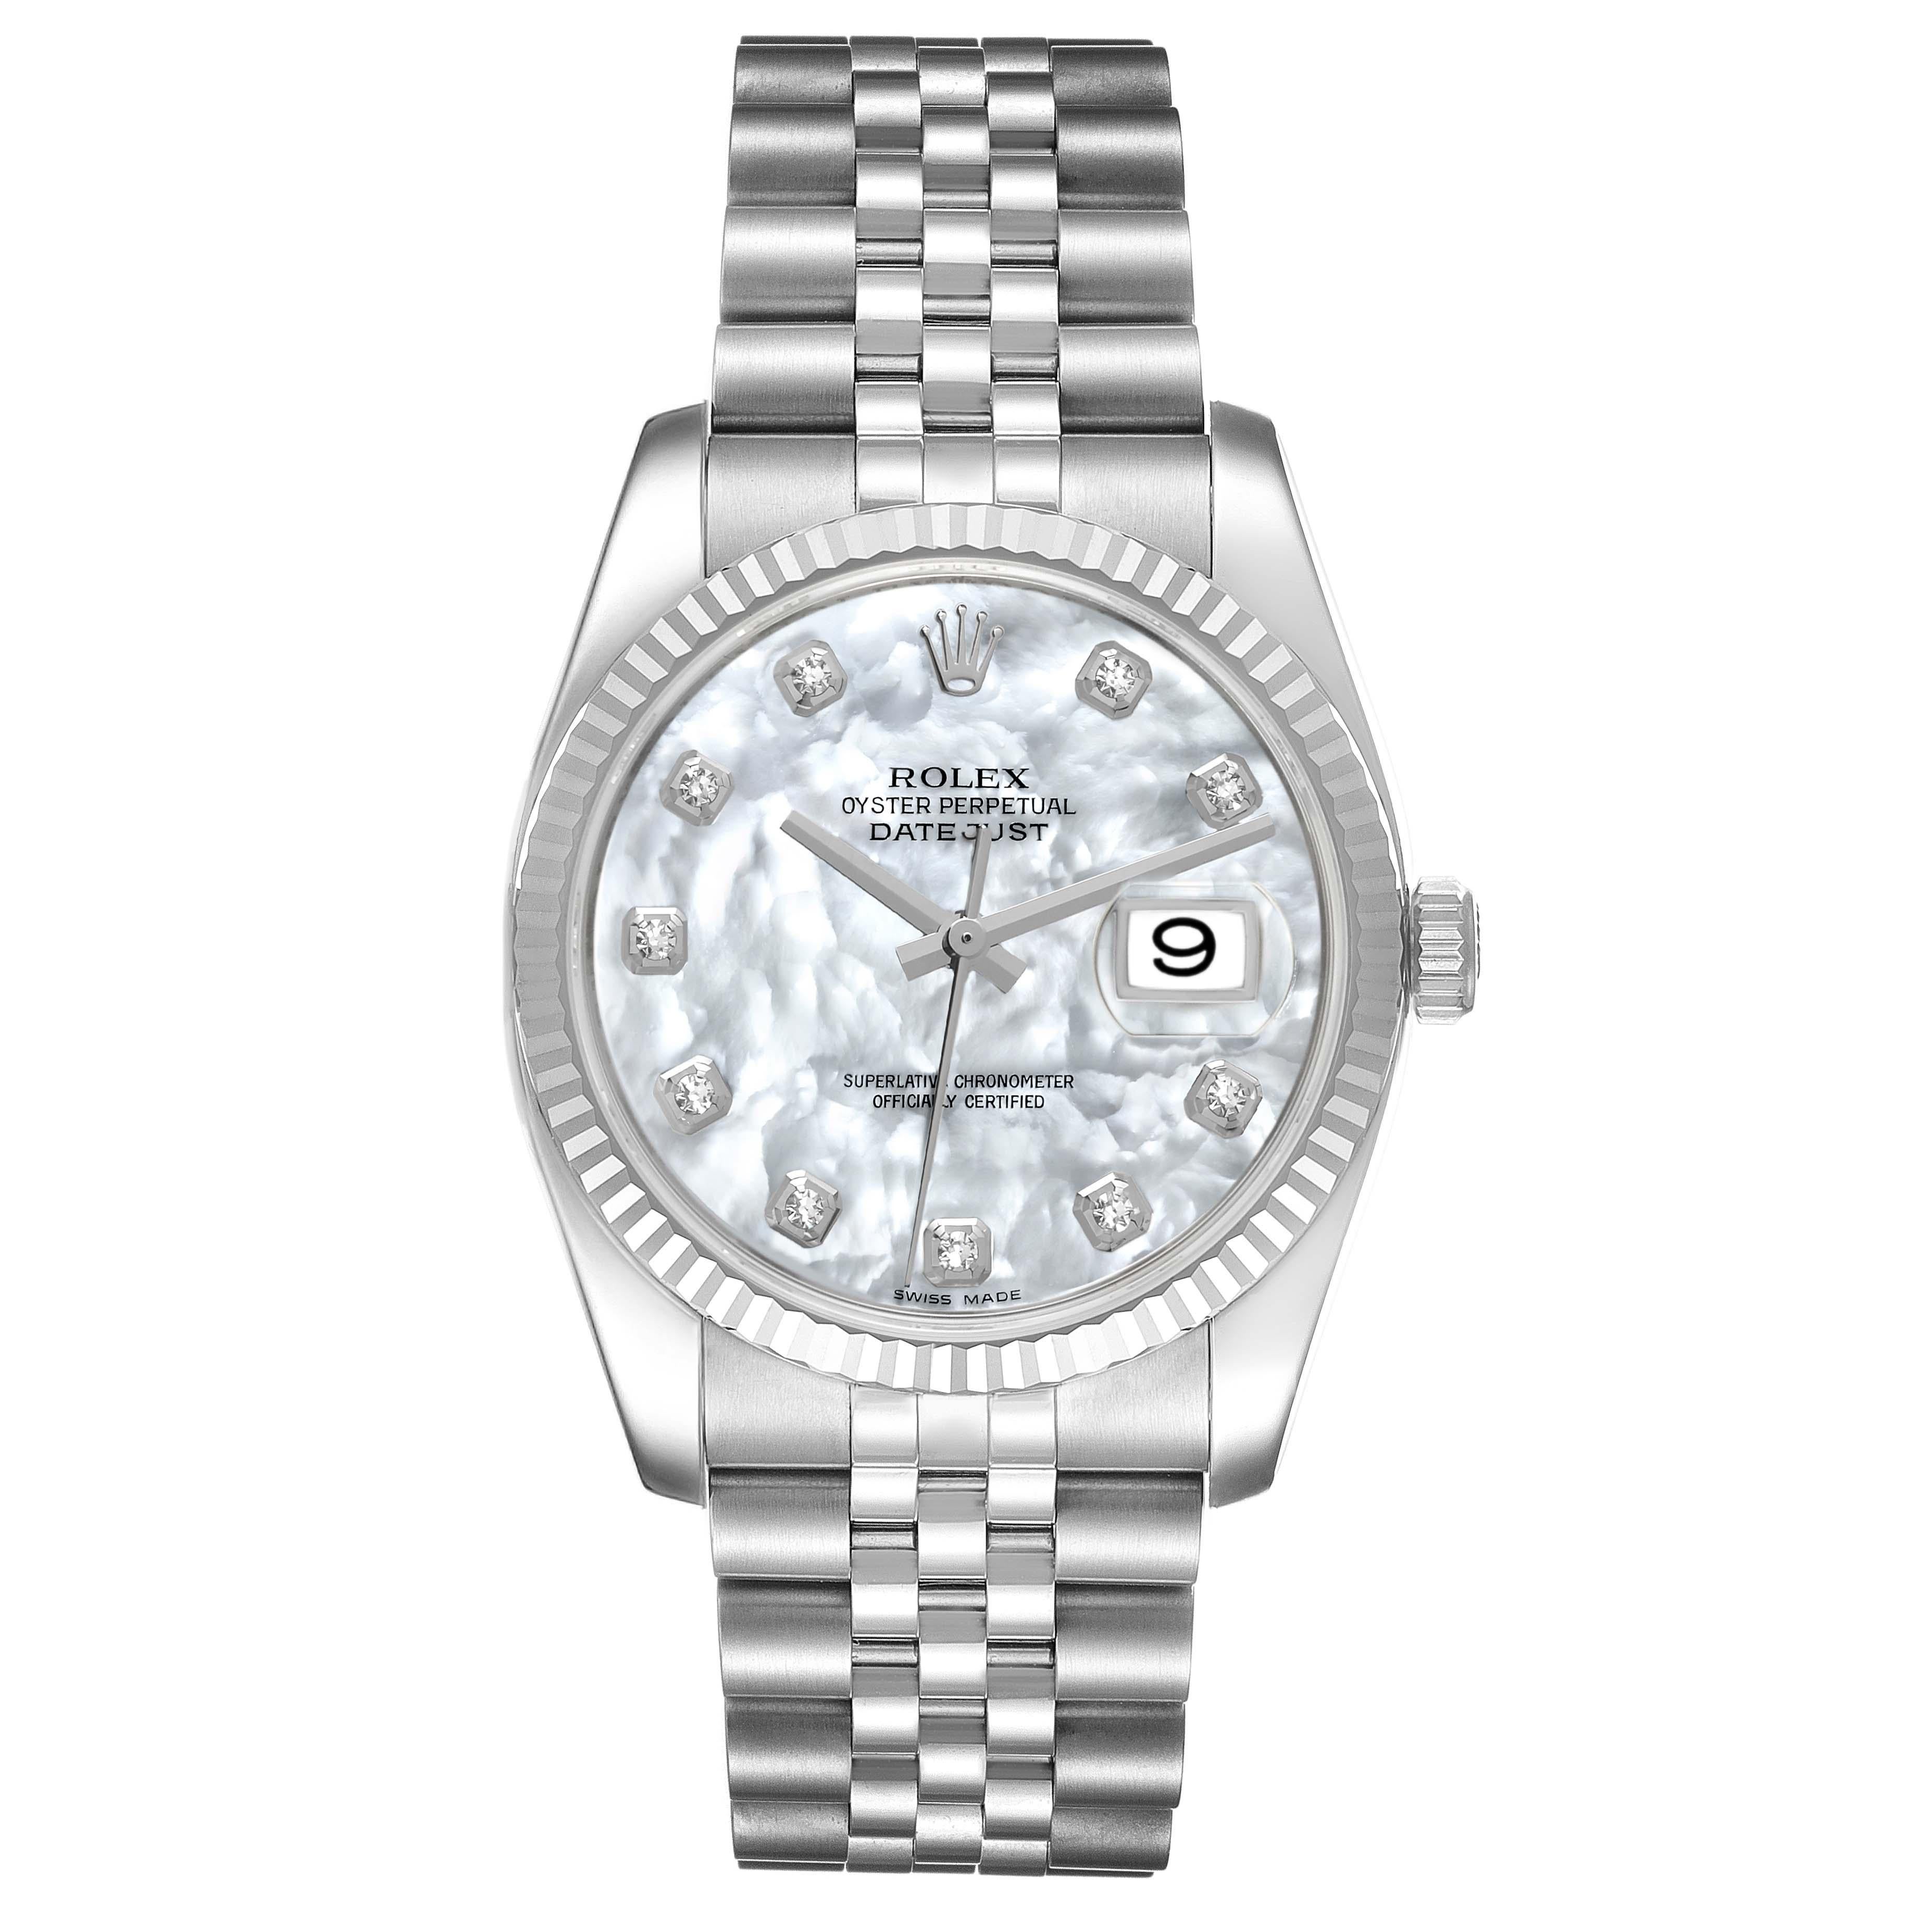 Rolex Datejust 36 Mother of Pearl Diamond Dial Steel Mens Watch 116234. Officially certified chronometer self-winding movement. Stainless steel case 36 mm in diameter.  Rolex logo on the crown. 18K white gold fluted bezel. Scratch resistant sapphire